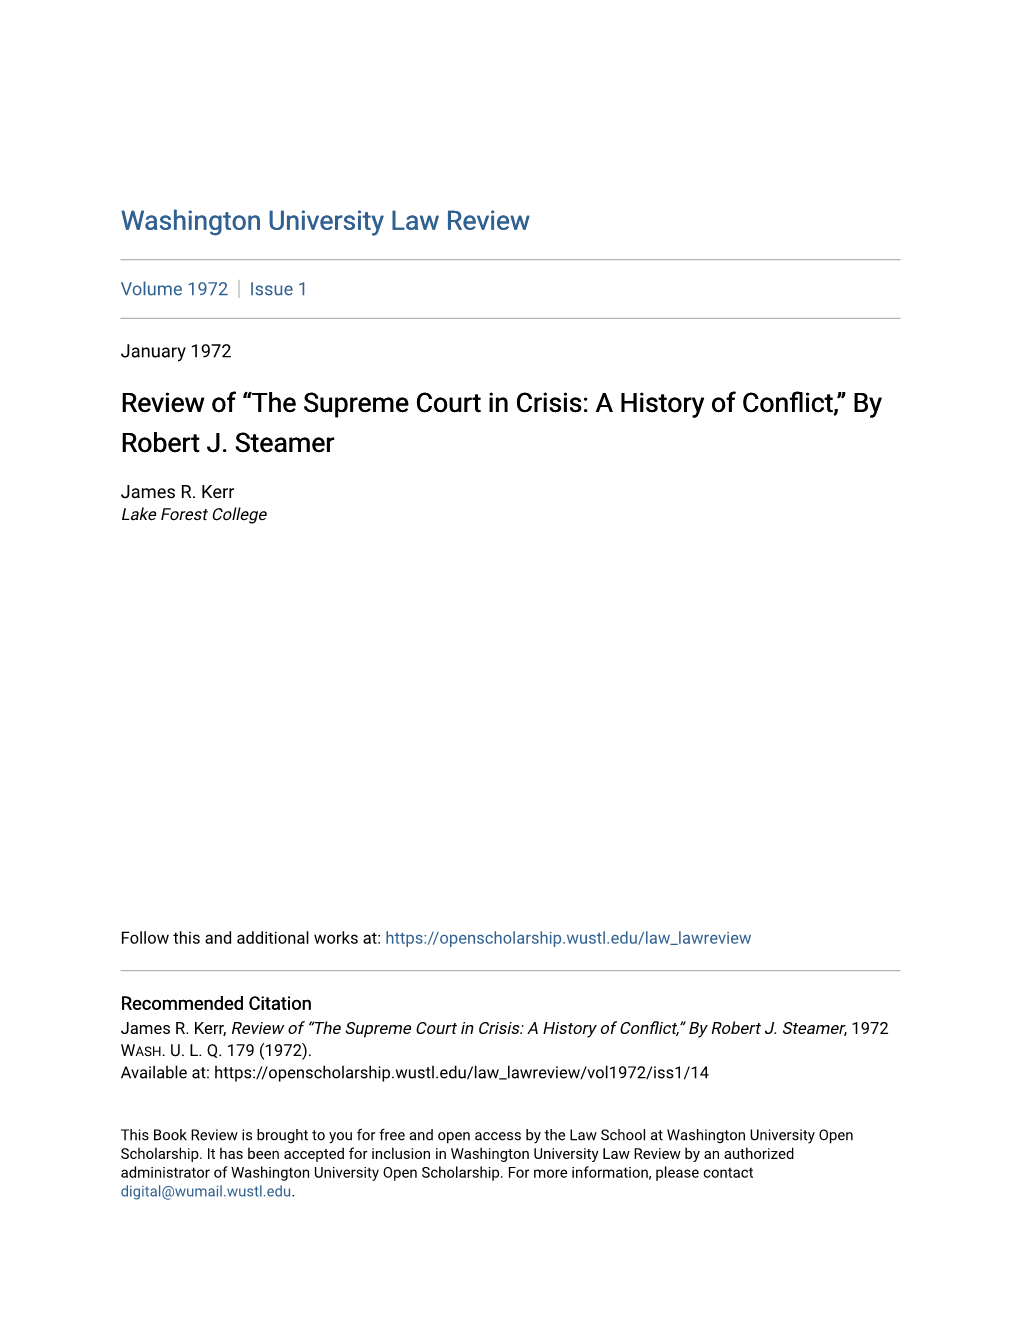 Review of “The Supreme Court in Crisis: a History of Conflict,” by Robert J